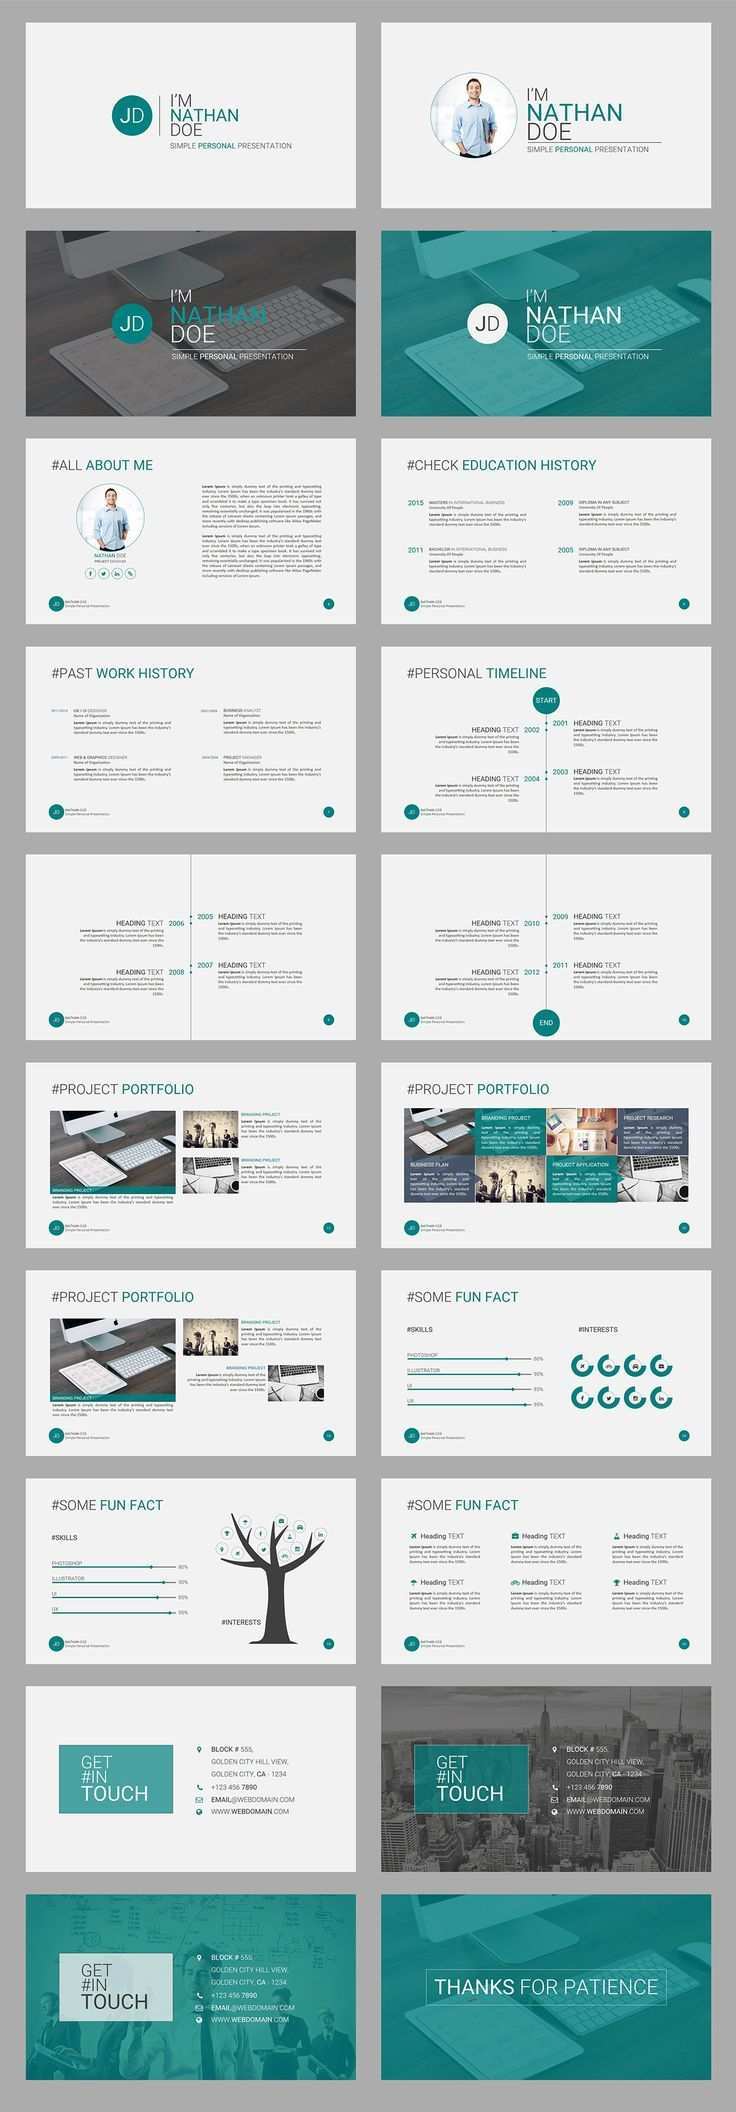 Jd Personal Powerpoint Presentation Template On Behance Behance Jd Personal Port Presentation Template Free Ppt Template Design Powerpoint Presentation